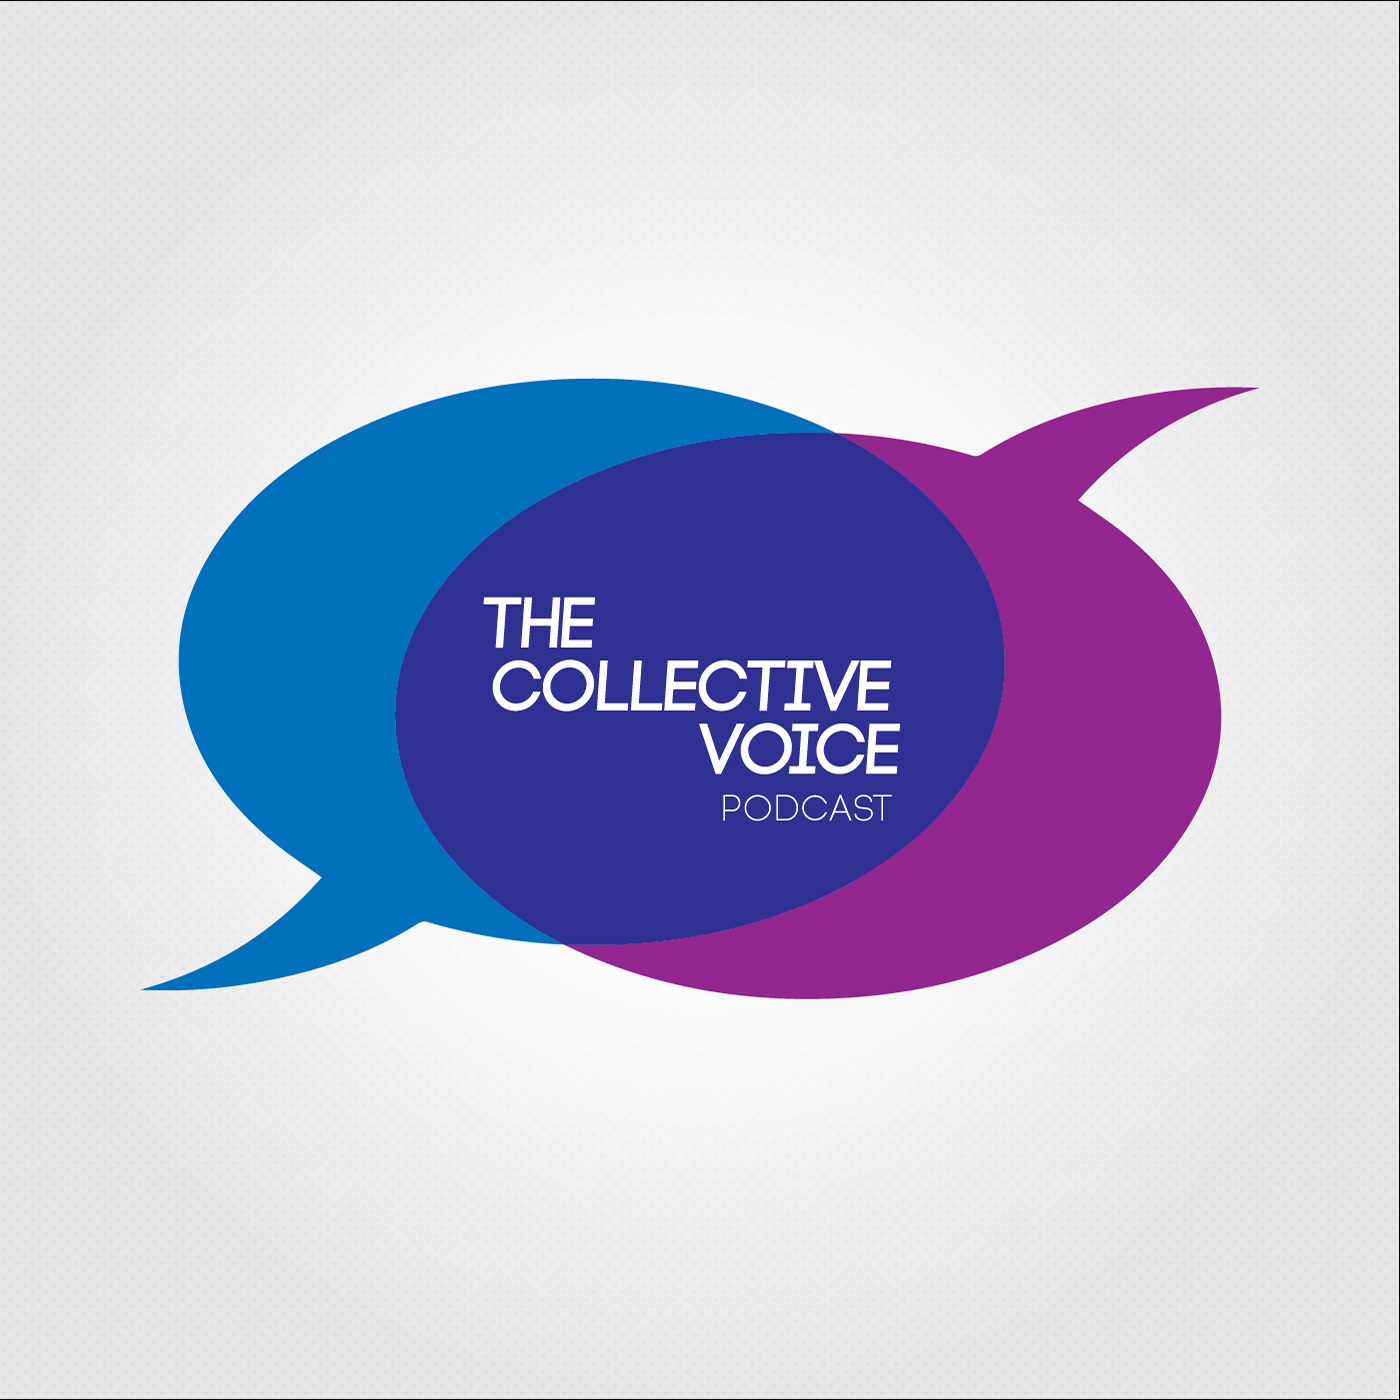 The Collective Voice